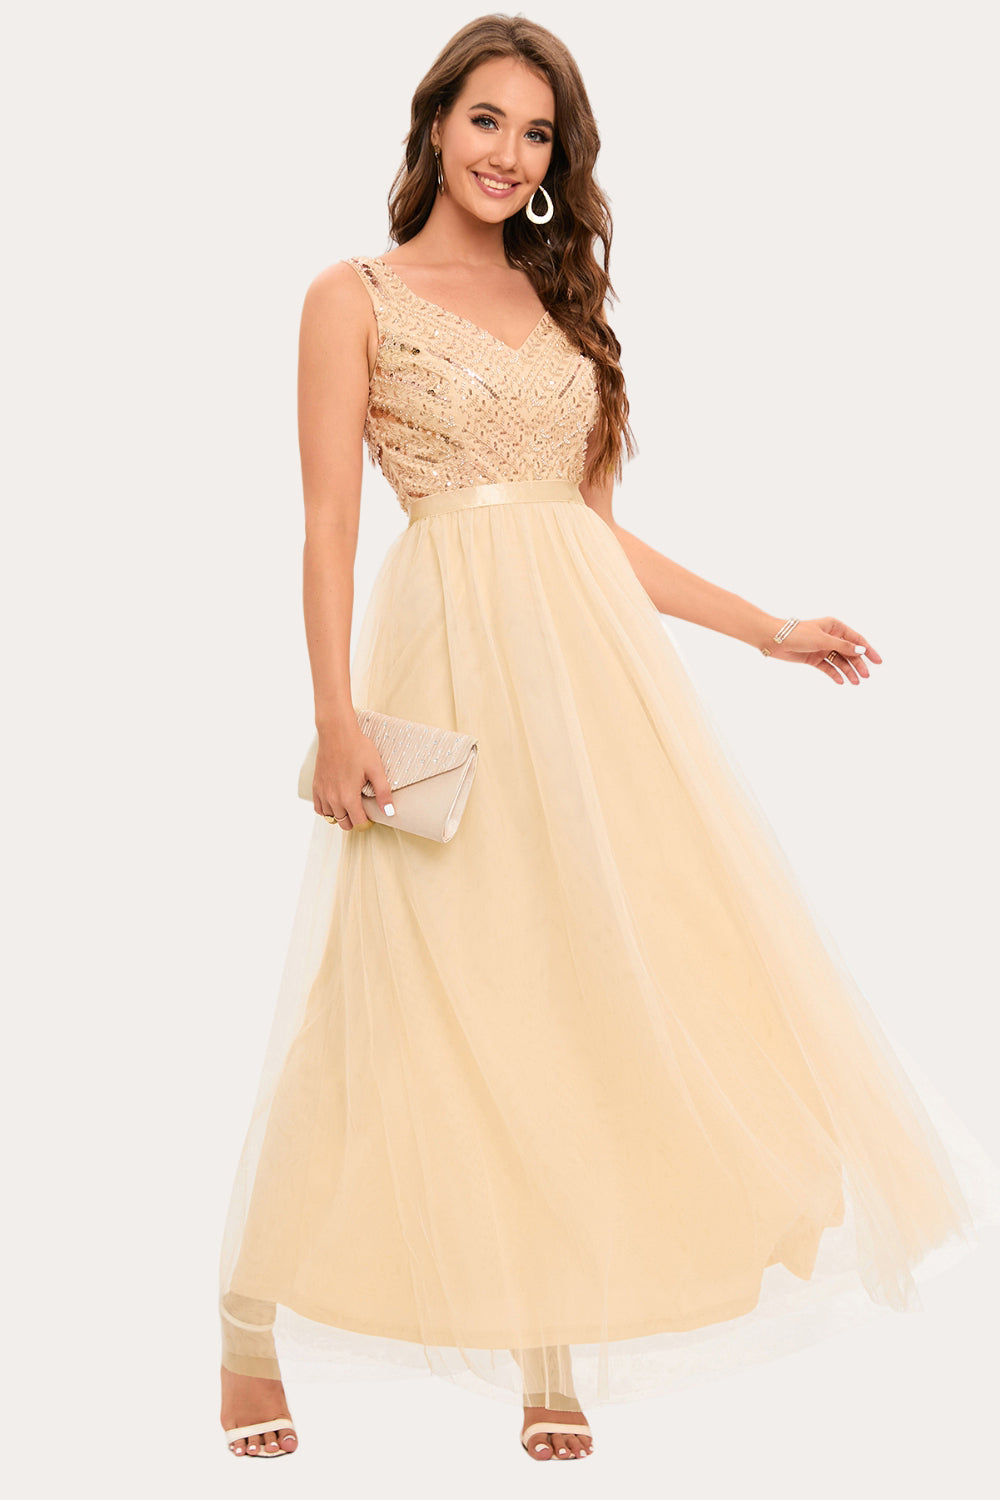 Sparkly Champagne Beaded Long Tulle Formal Party Dress